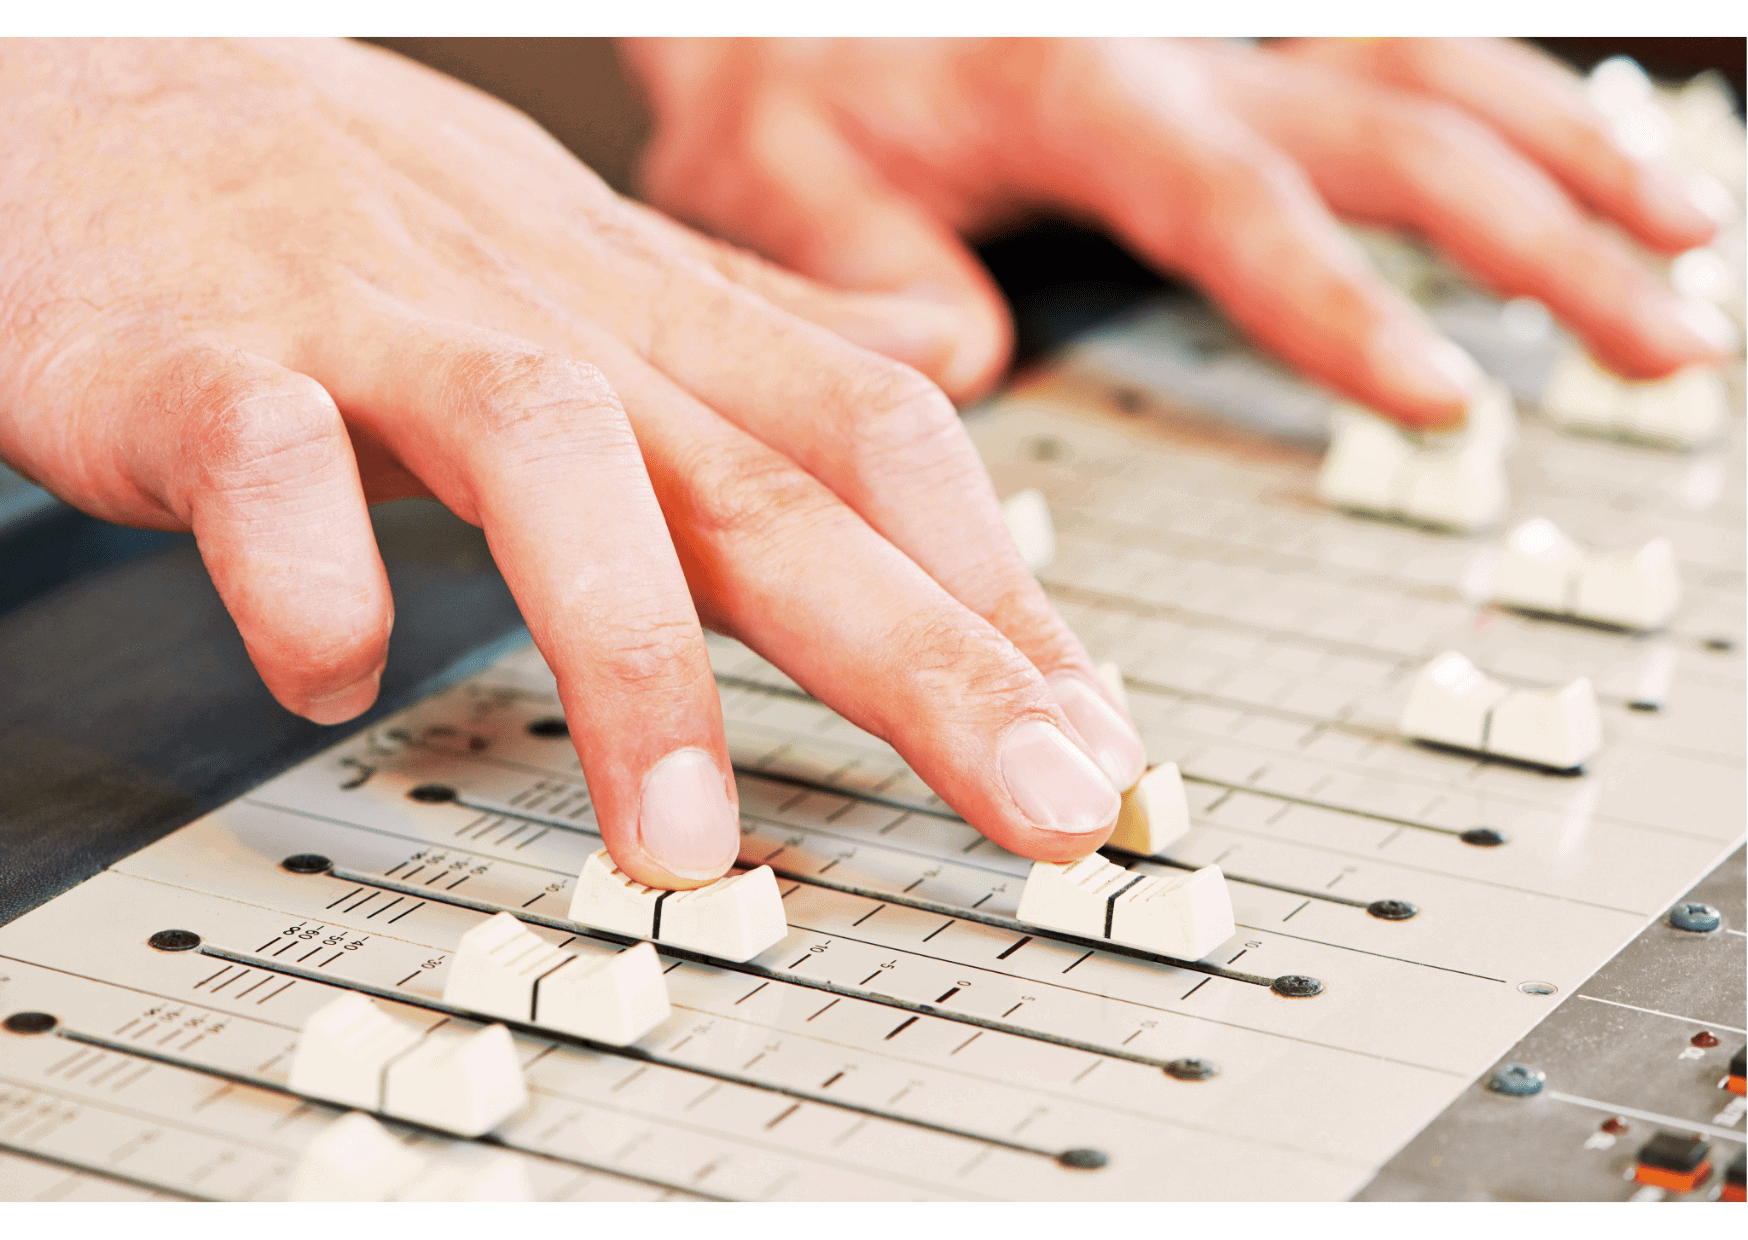 Two hands adjusting white sliding buttons on a sound mixing board